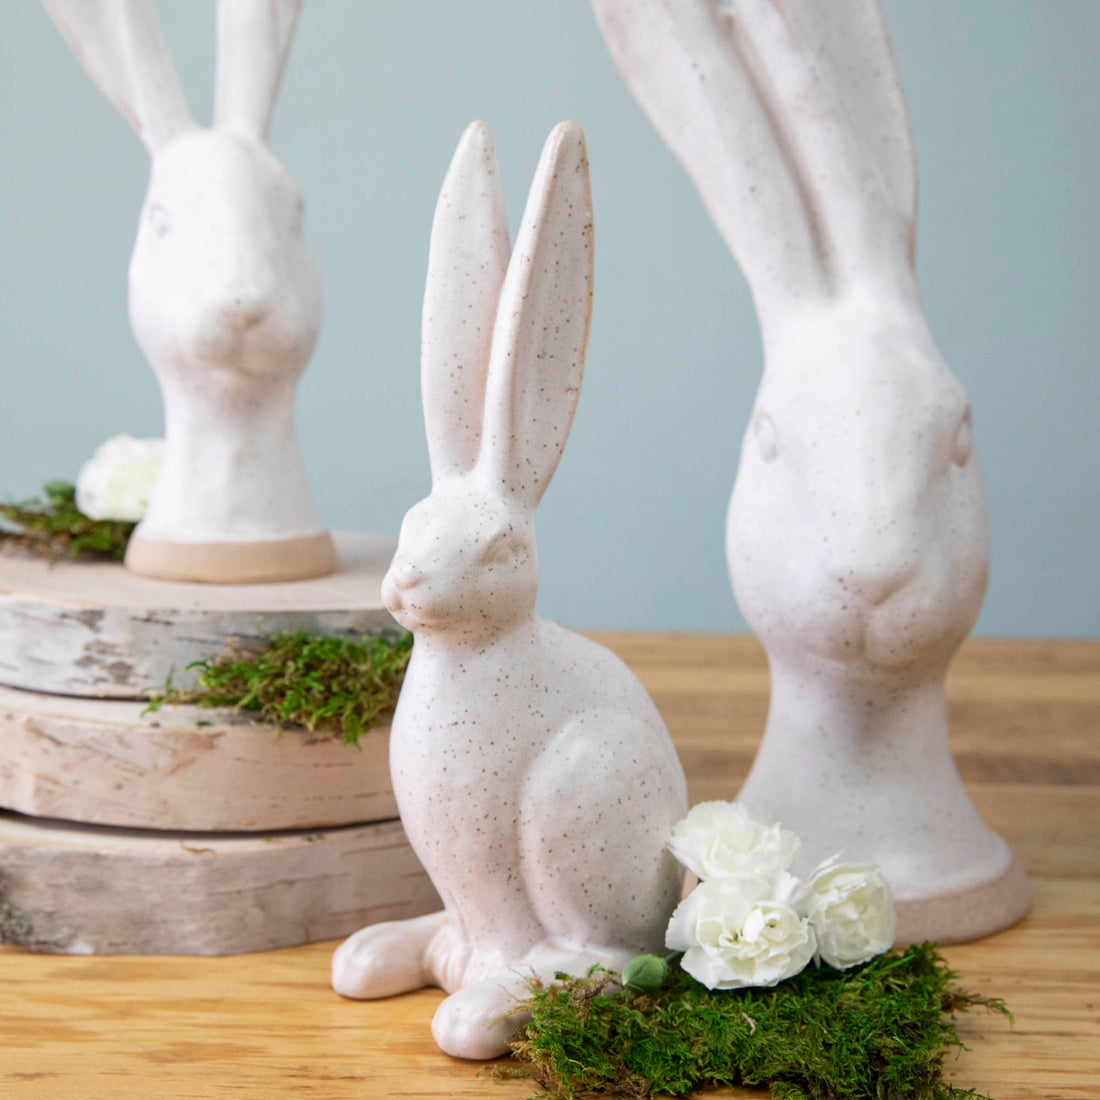 A group of enchanting Matte White Ceramic Hares by HomArt, on a wood surface, serving as a garden decoration.